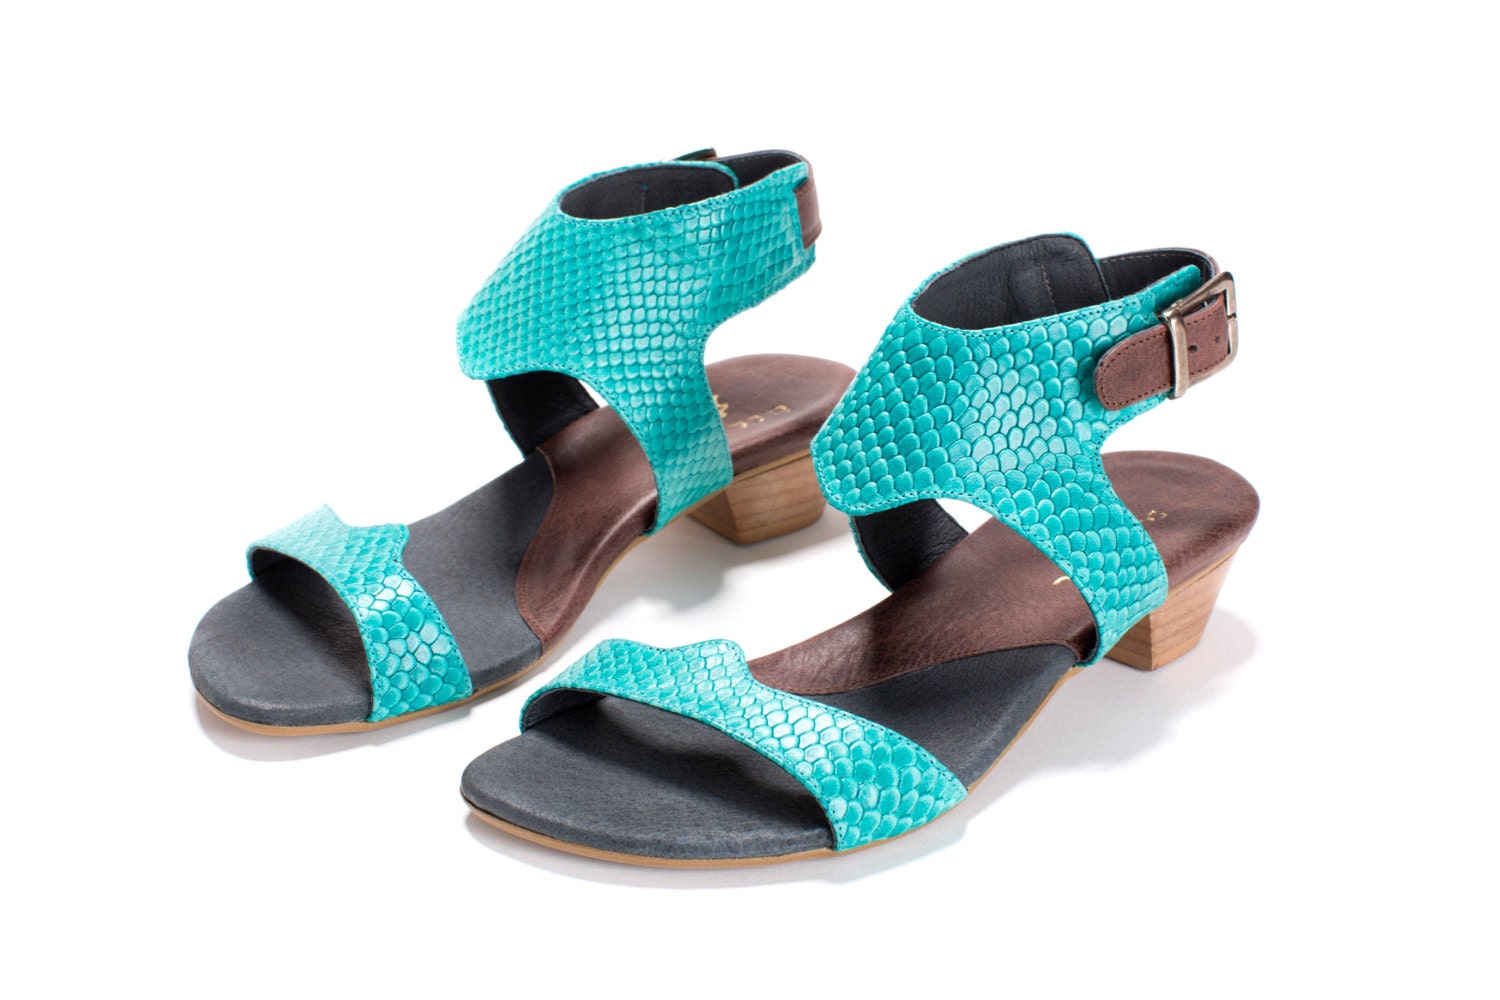 Xisca Turquoise Leather Sandals for Women - MichalMiller